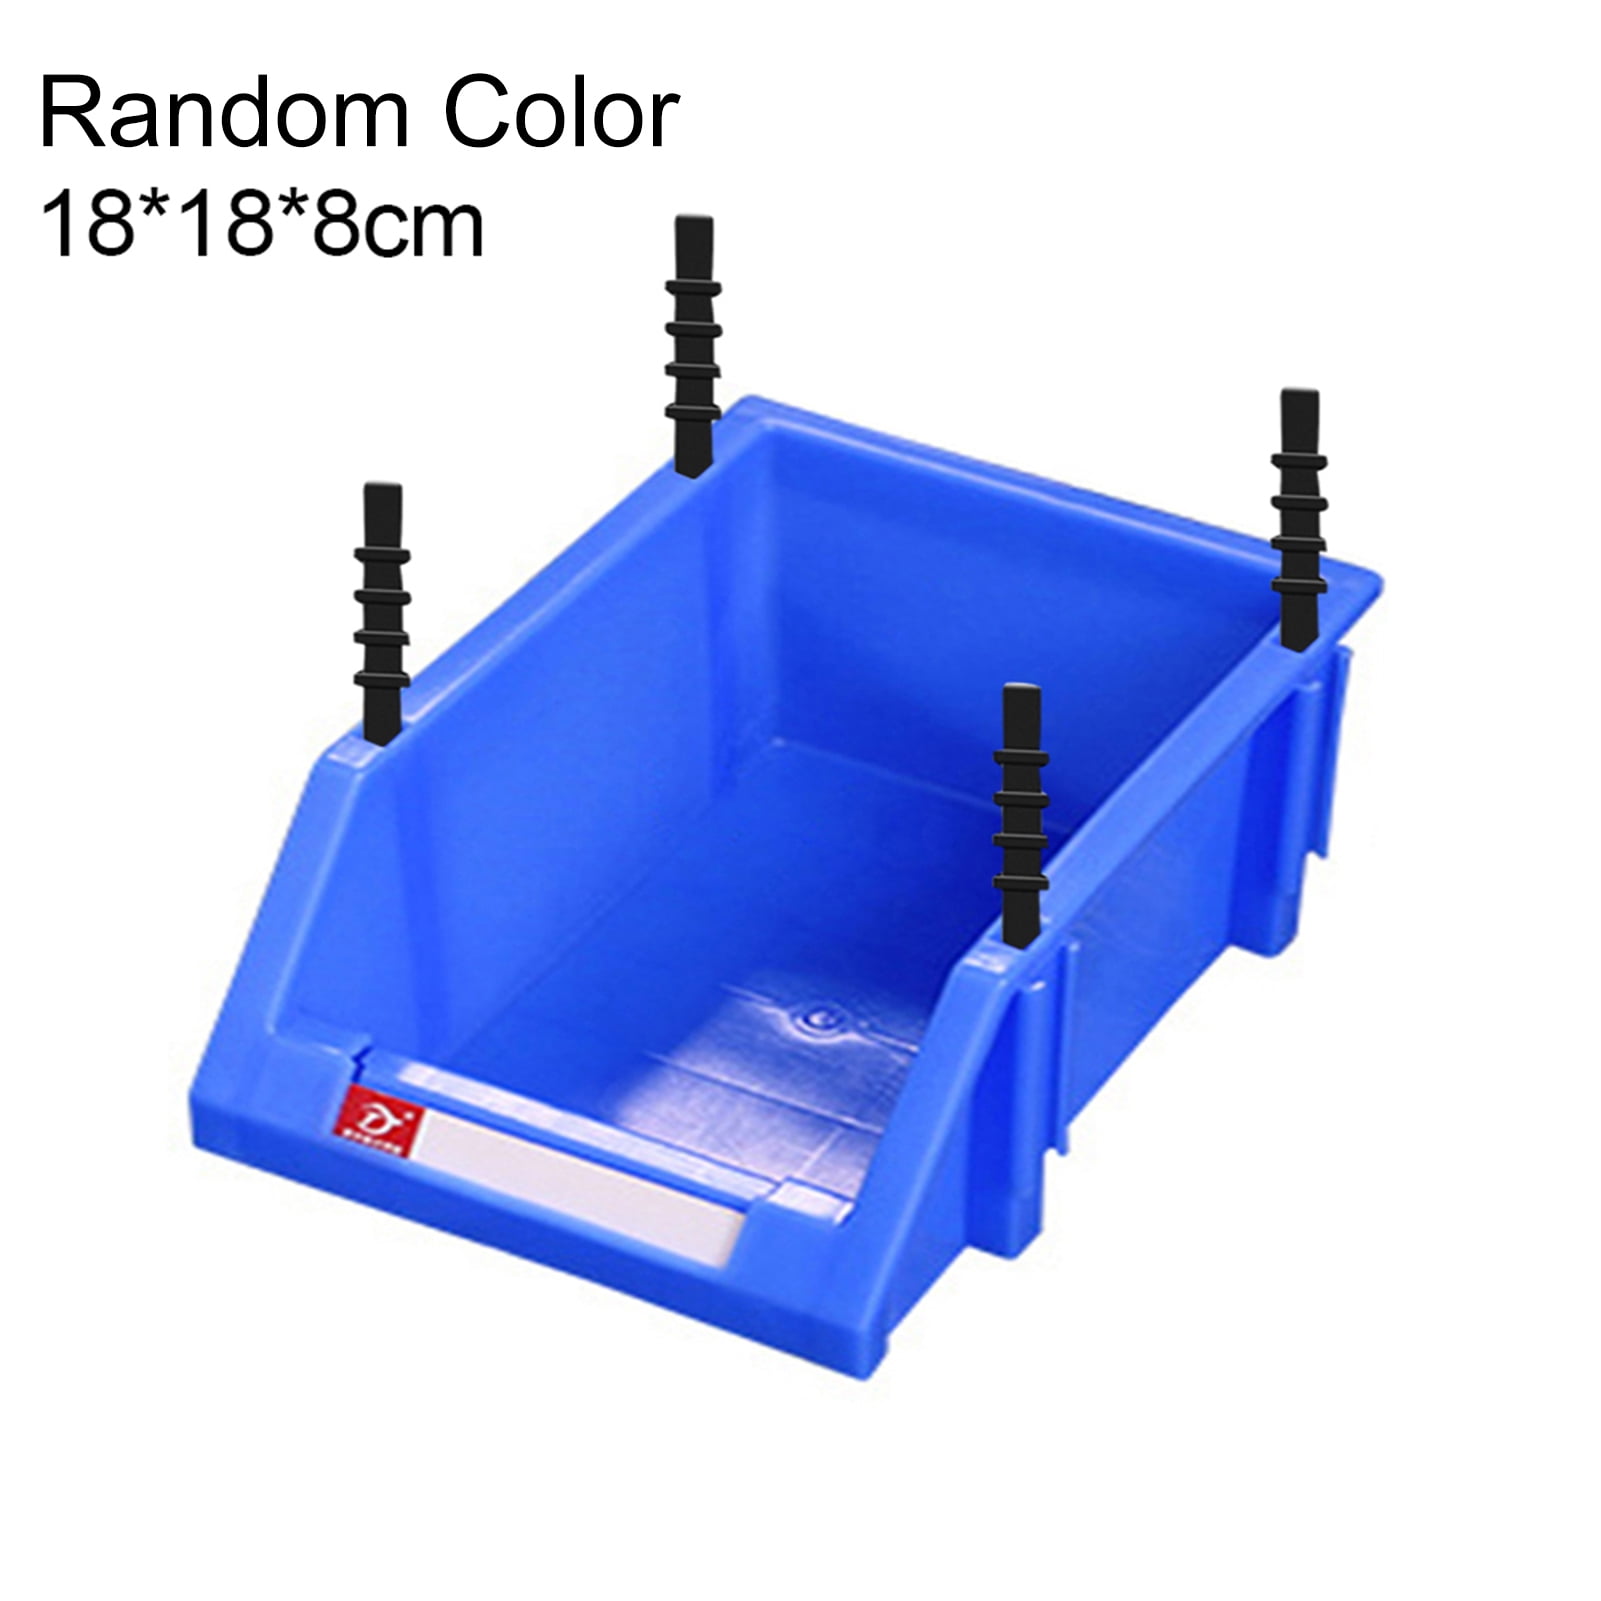 Customized Plastic Stackable Small Parts Bins Storage Organizer